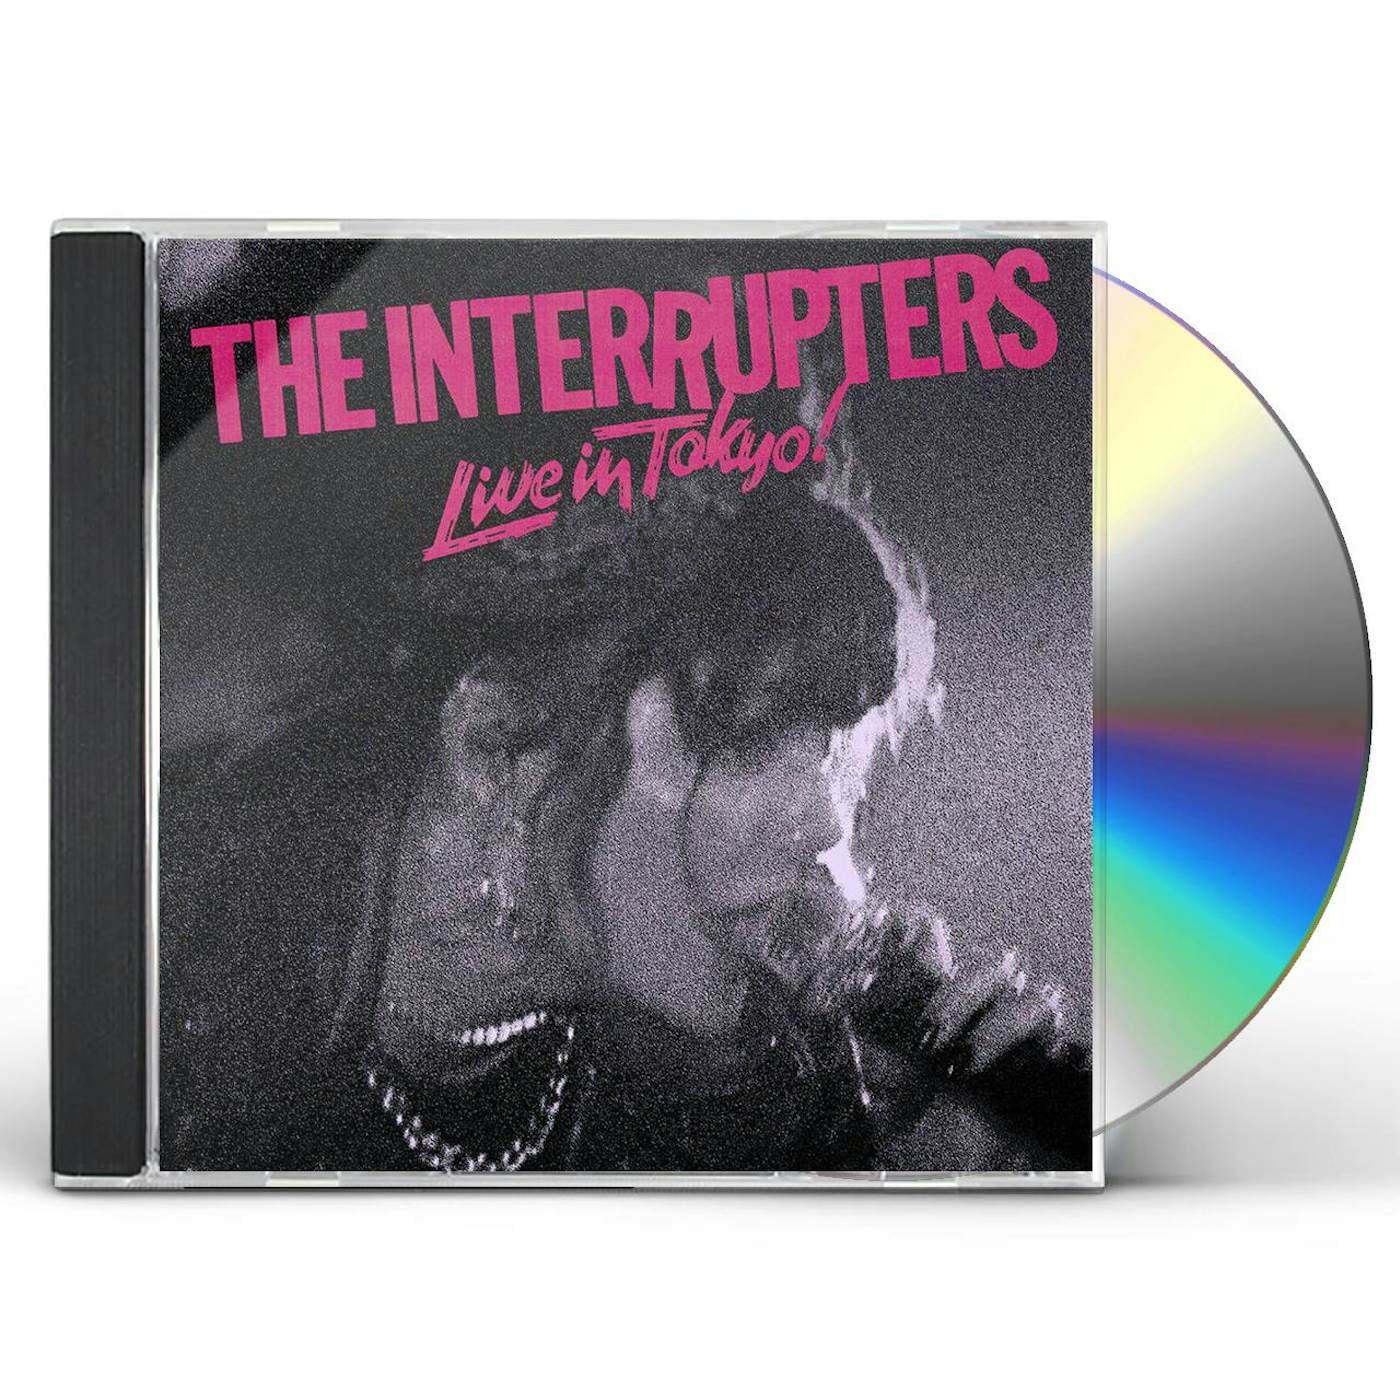 The Interrupters LIVE IN TOKYO CD